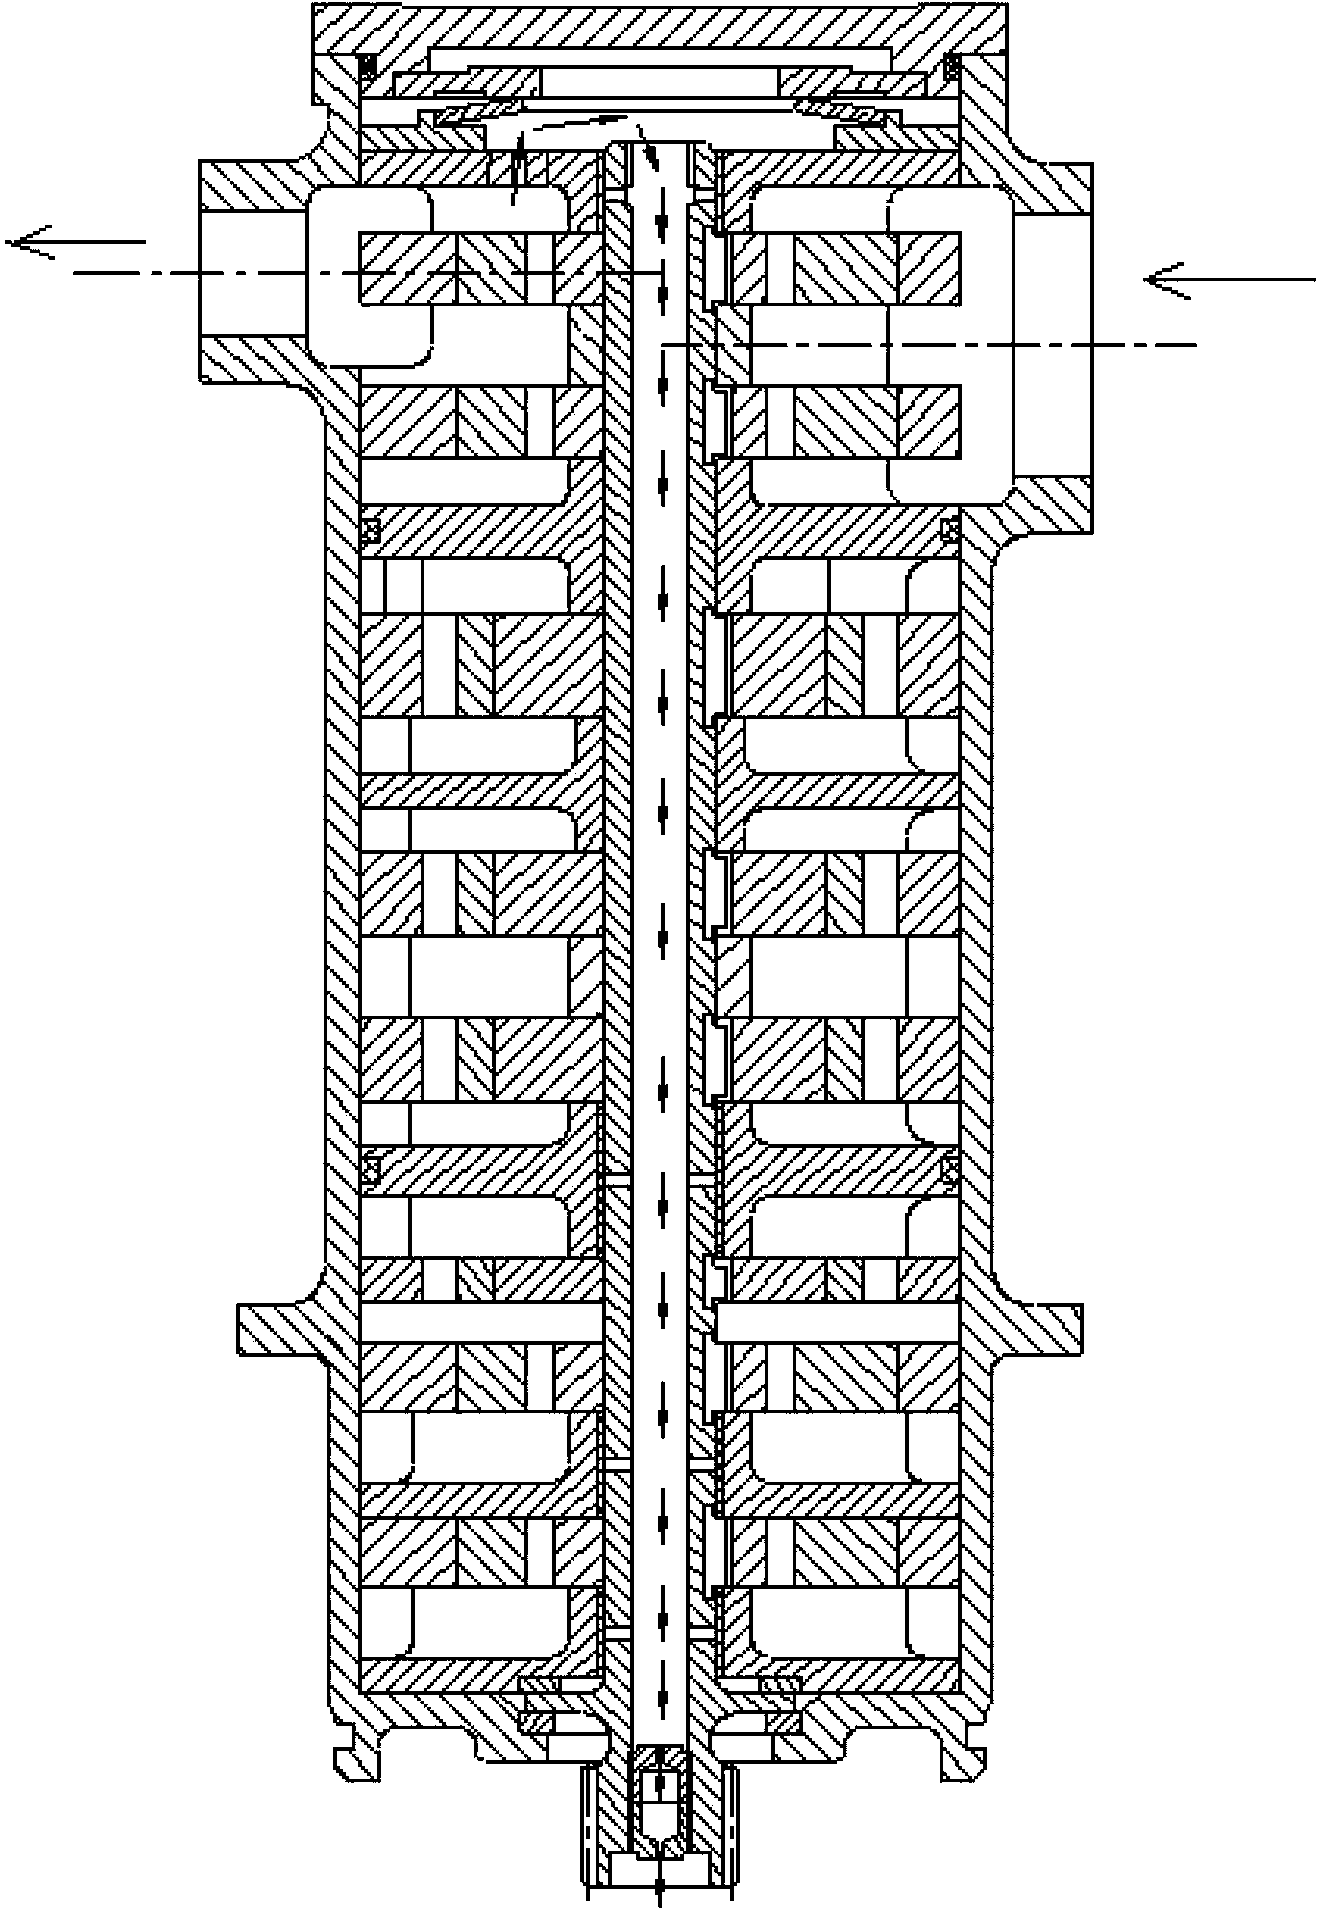 Anti-siphon structure in oil suction inlet of lubricating oil pump